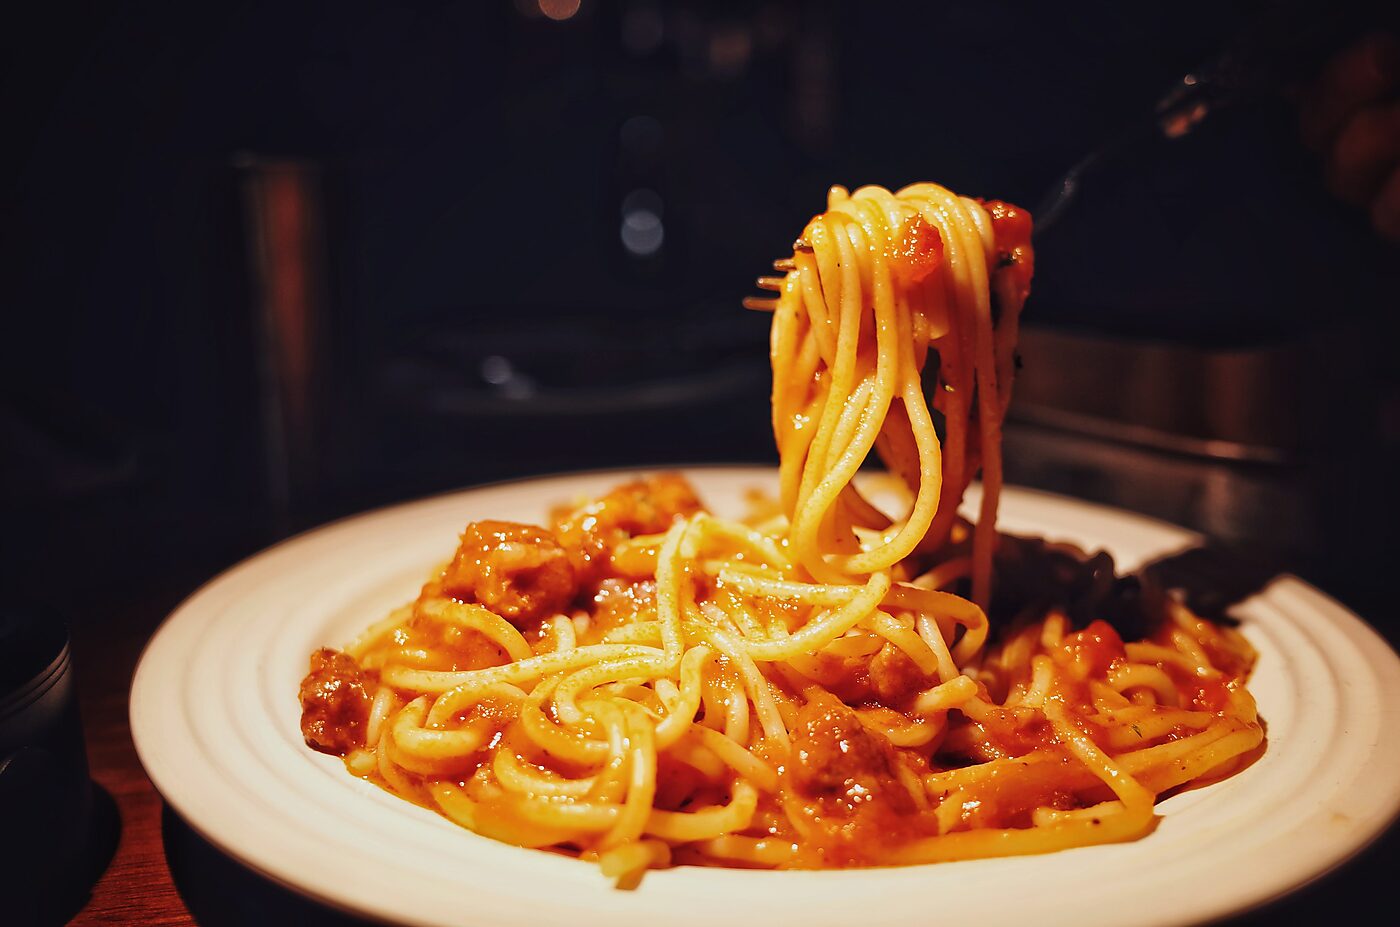 Pasta with tomato sauce. Photo by Yeh Xintong on Unsplash.